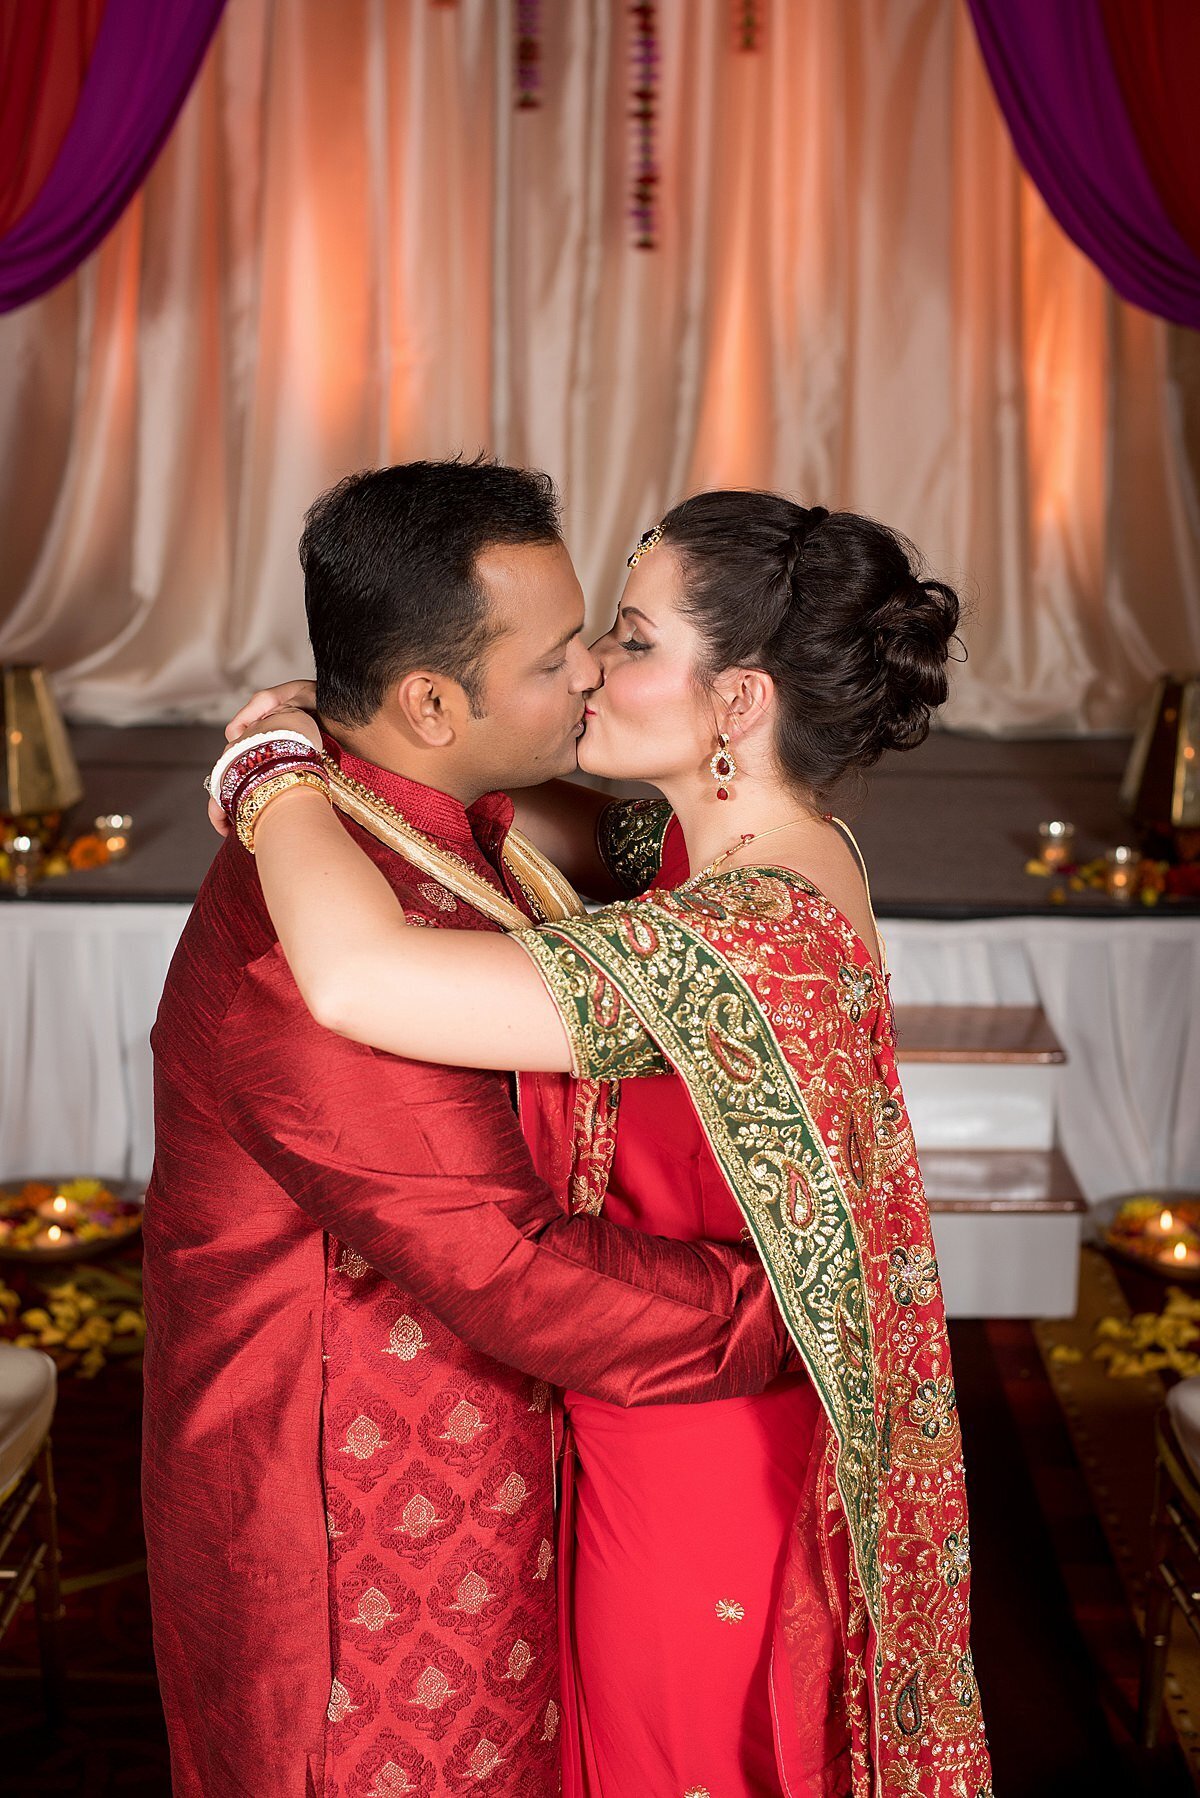 Hindu groom wearing a red sherwani and an Indian bride wearing a red, green and gold saree kissing in front of the mandap